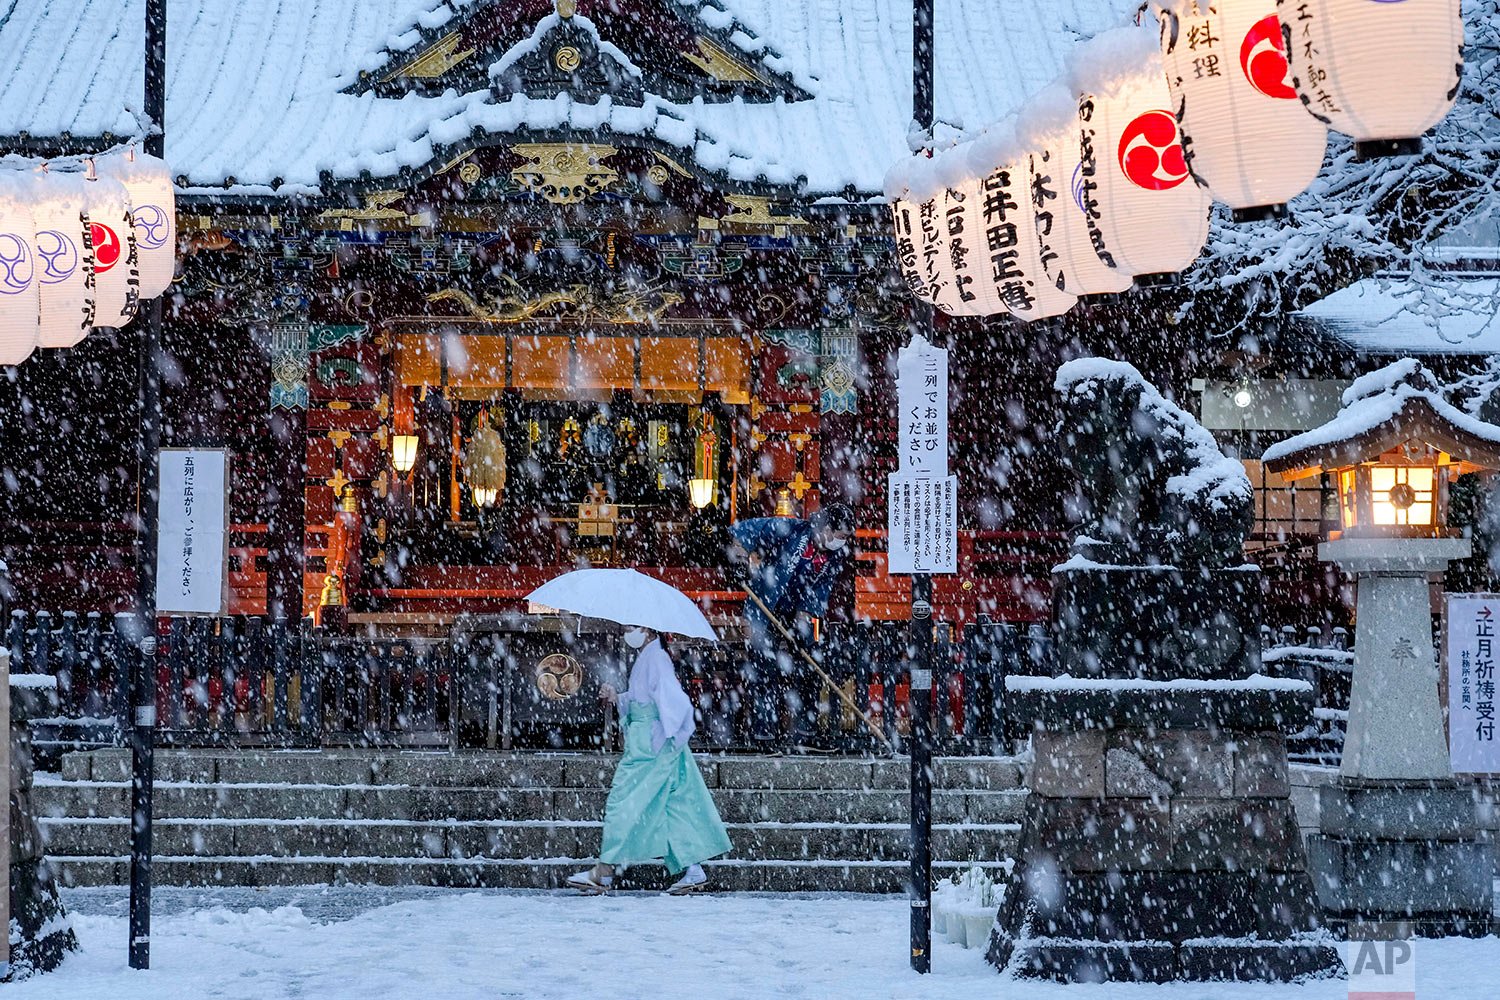  A shrine maiden walks past the main shrine while a worker clears the steps as the snow comes down Thursday, Jan. 6, 2022, in Tokyo. (AP Photo/Kiichiro Sato) 